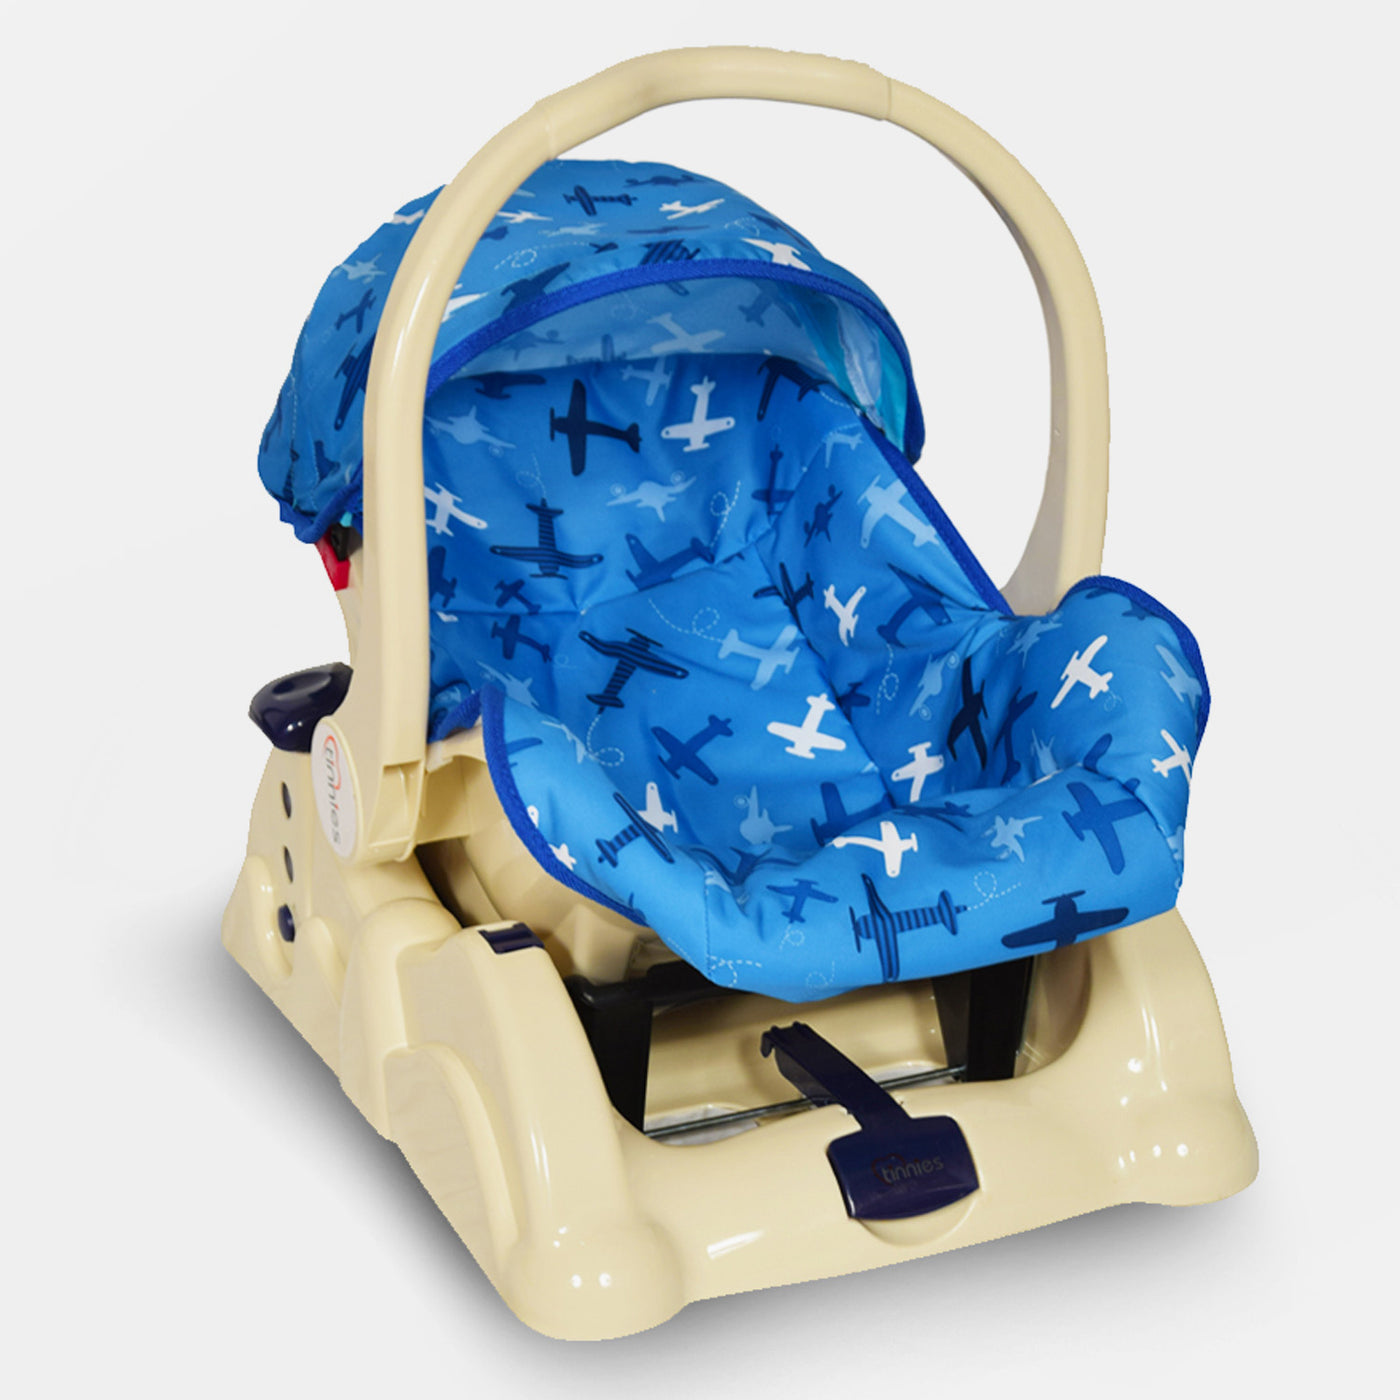 Tinnies Carry Cot W/Rocking T003 Blue E-C